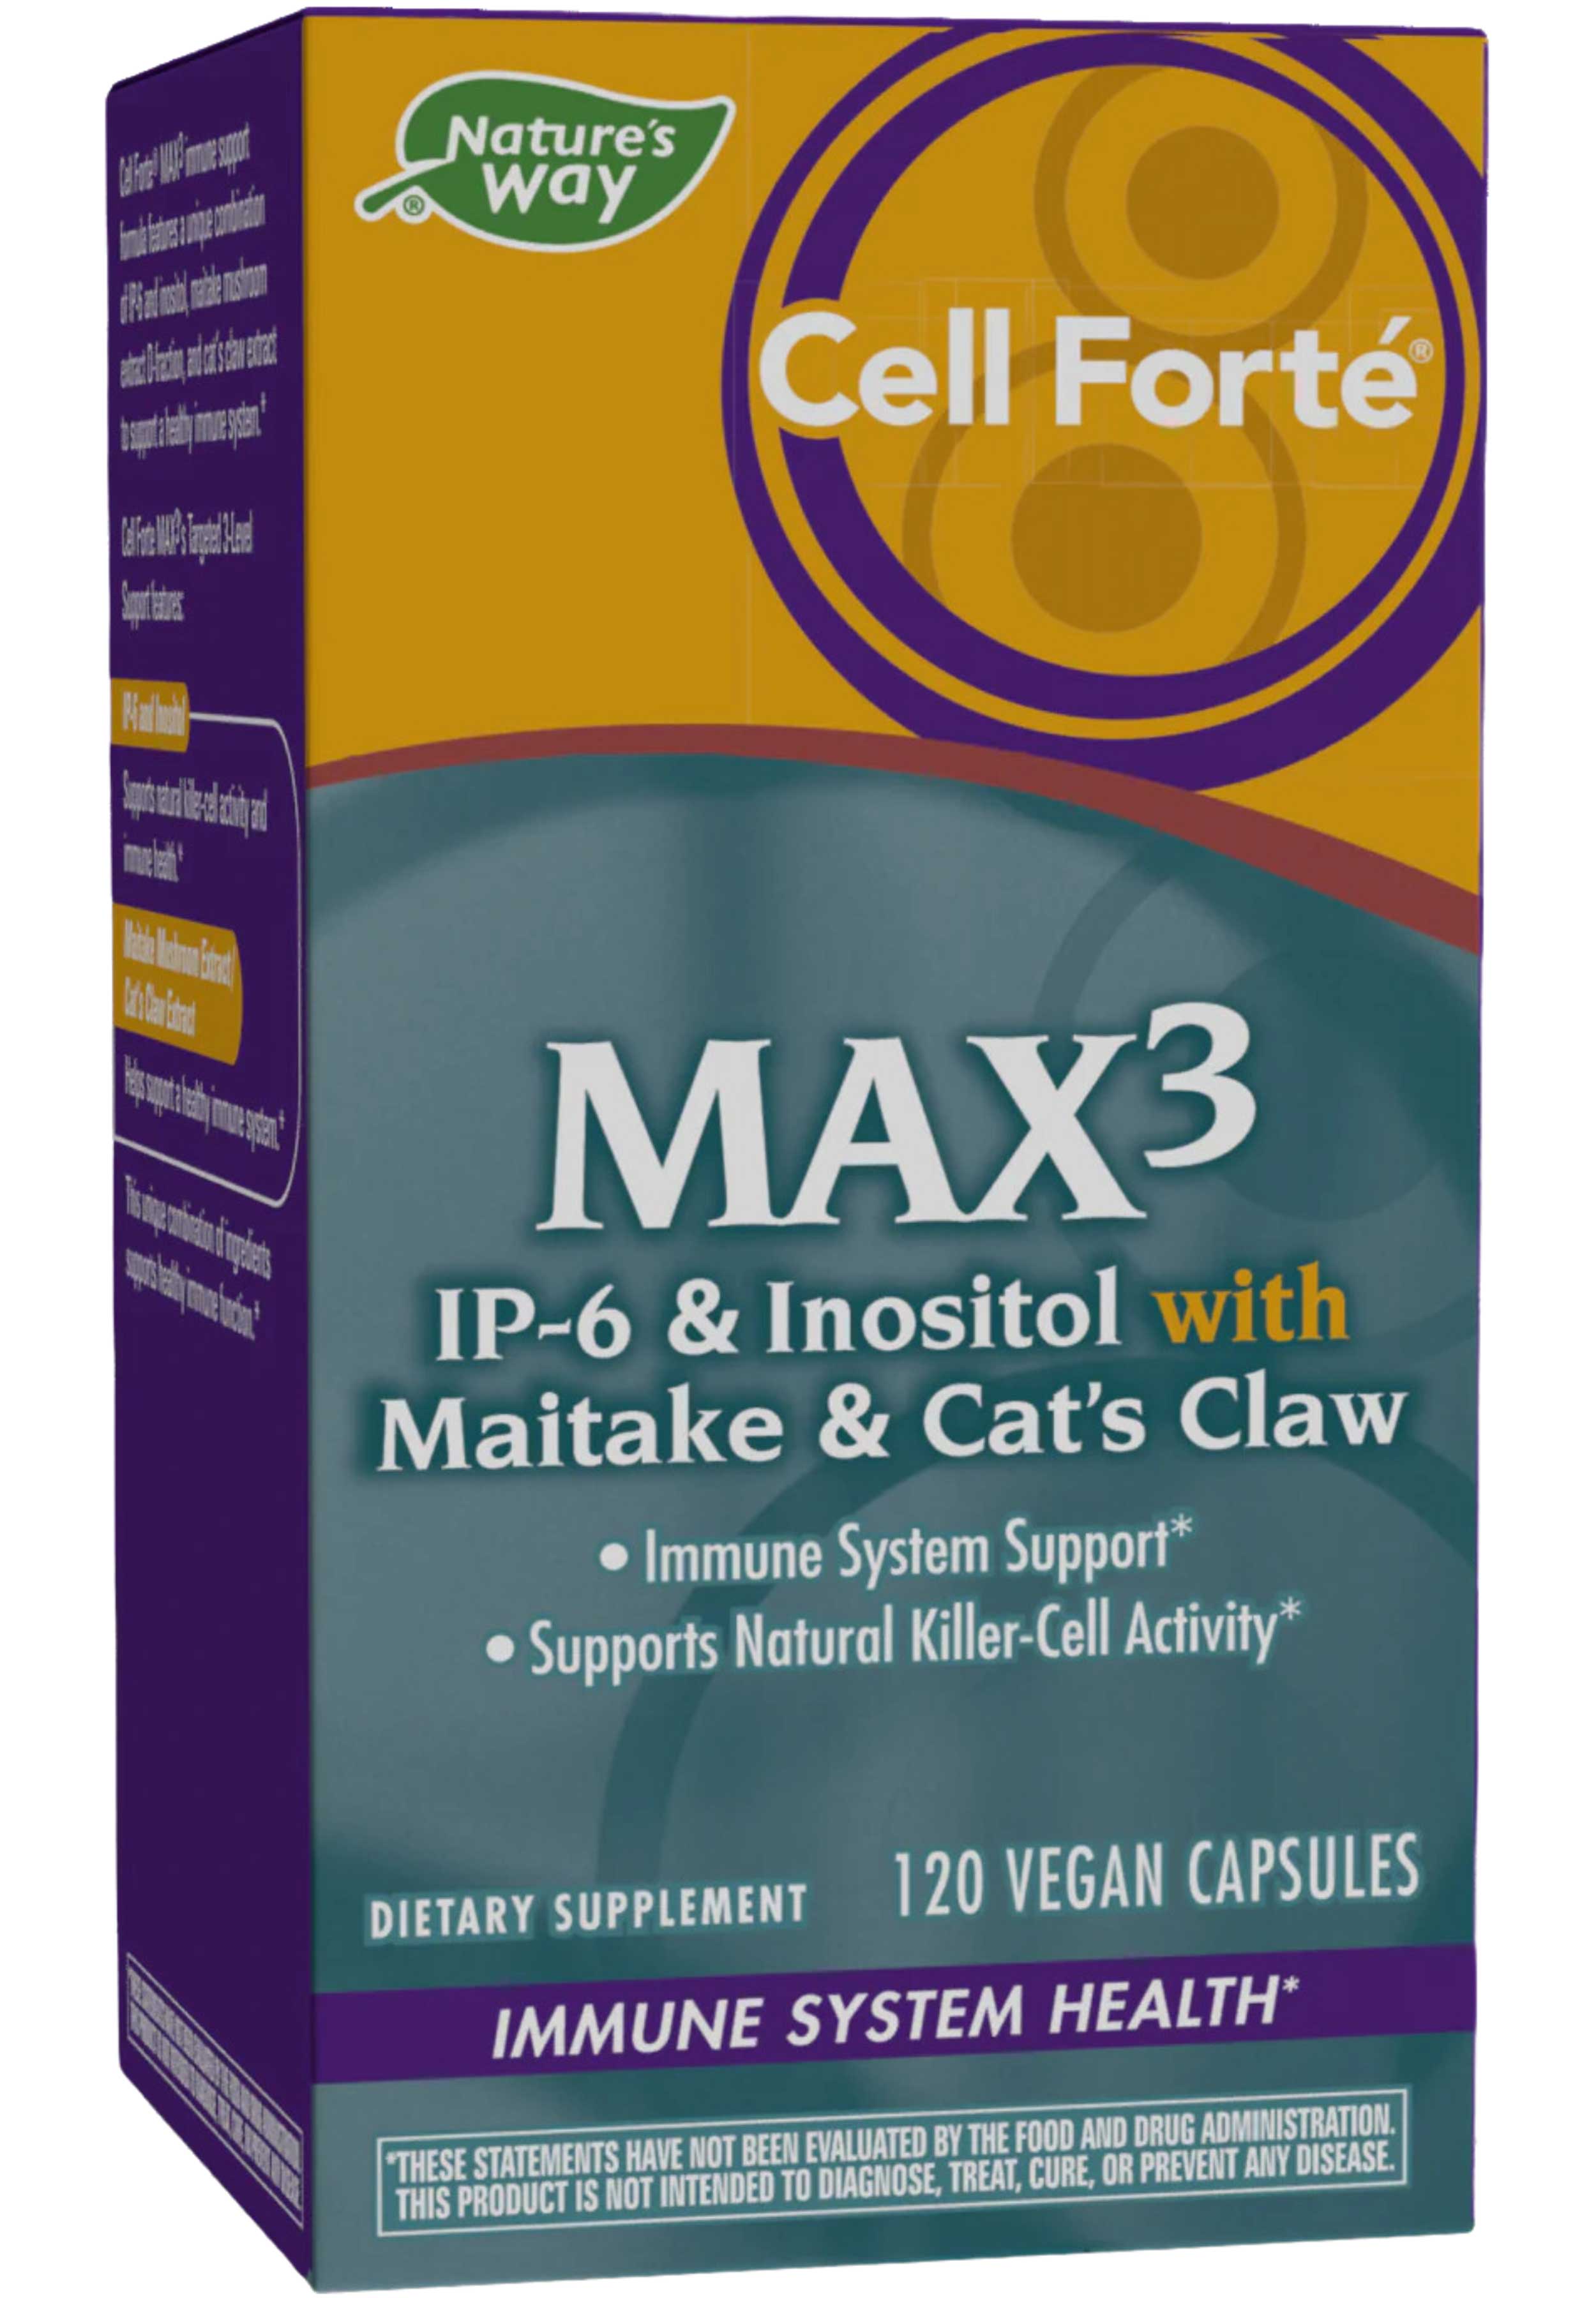 Nature's Way Cell Forté MAX 3 (Formerly Enzymatic Therapy Cell Forté MAX 3)